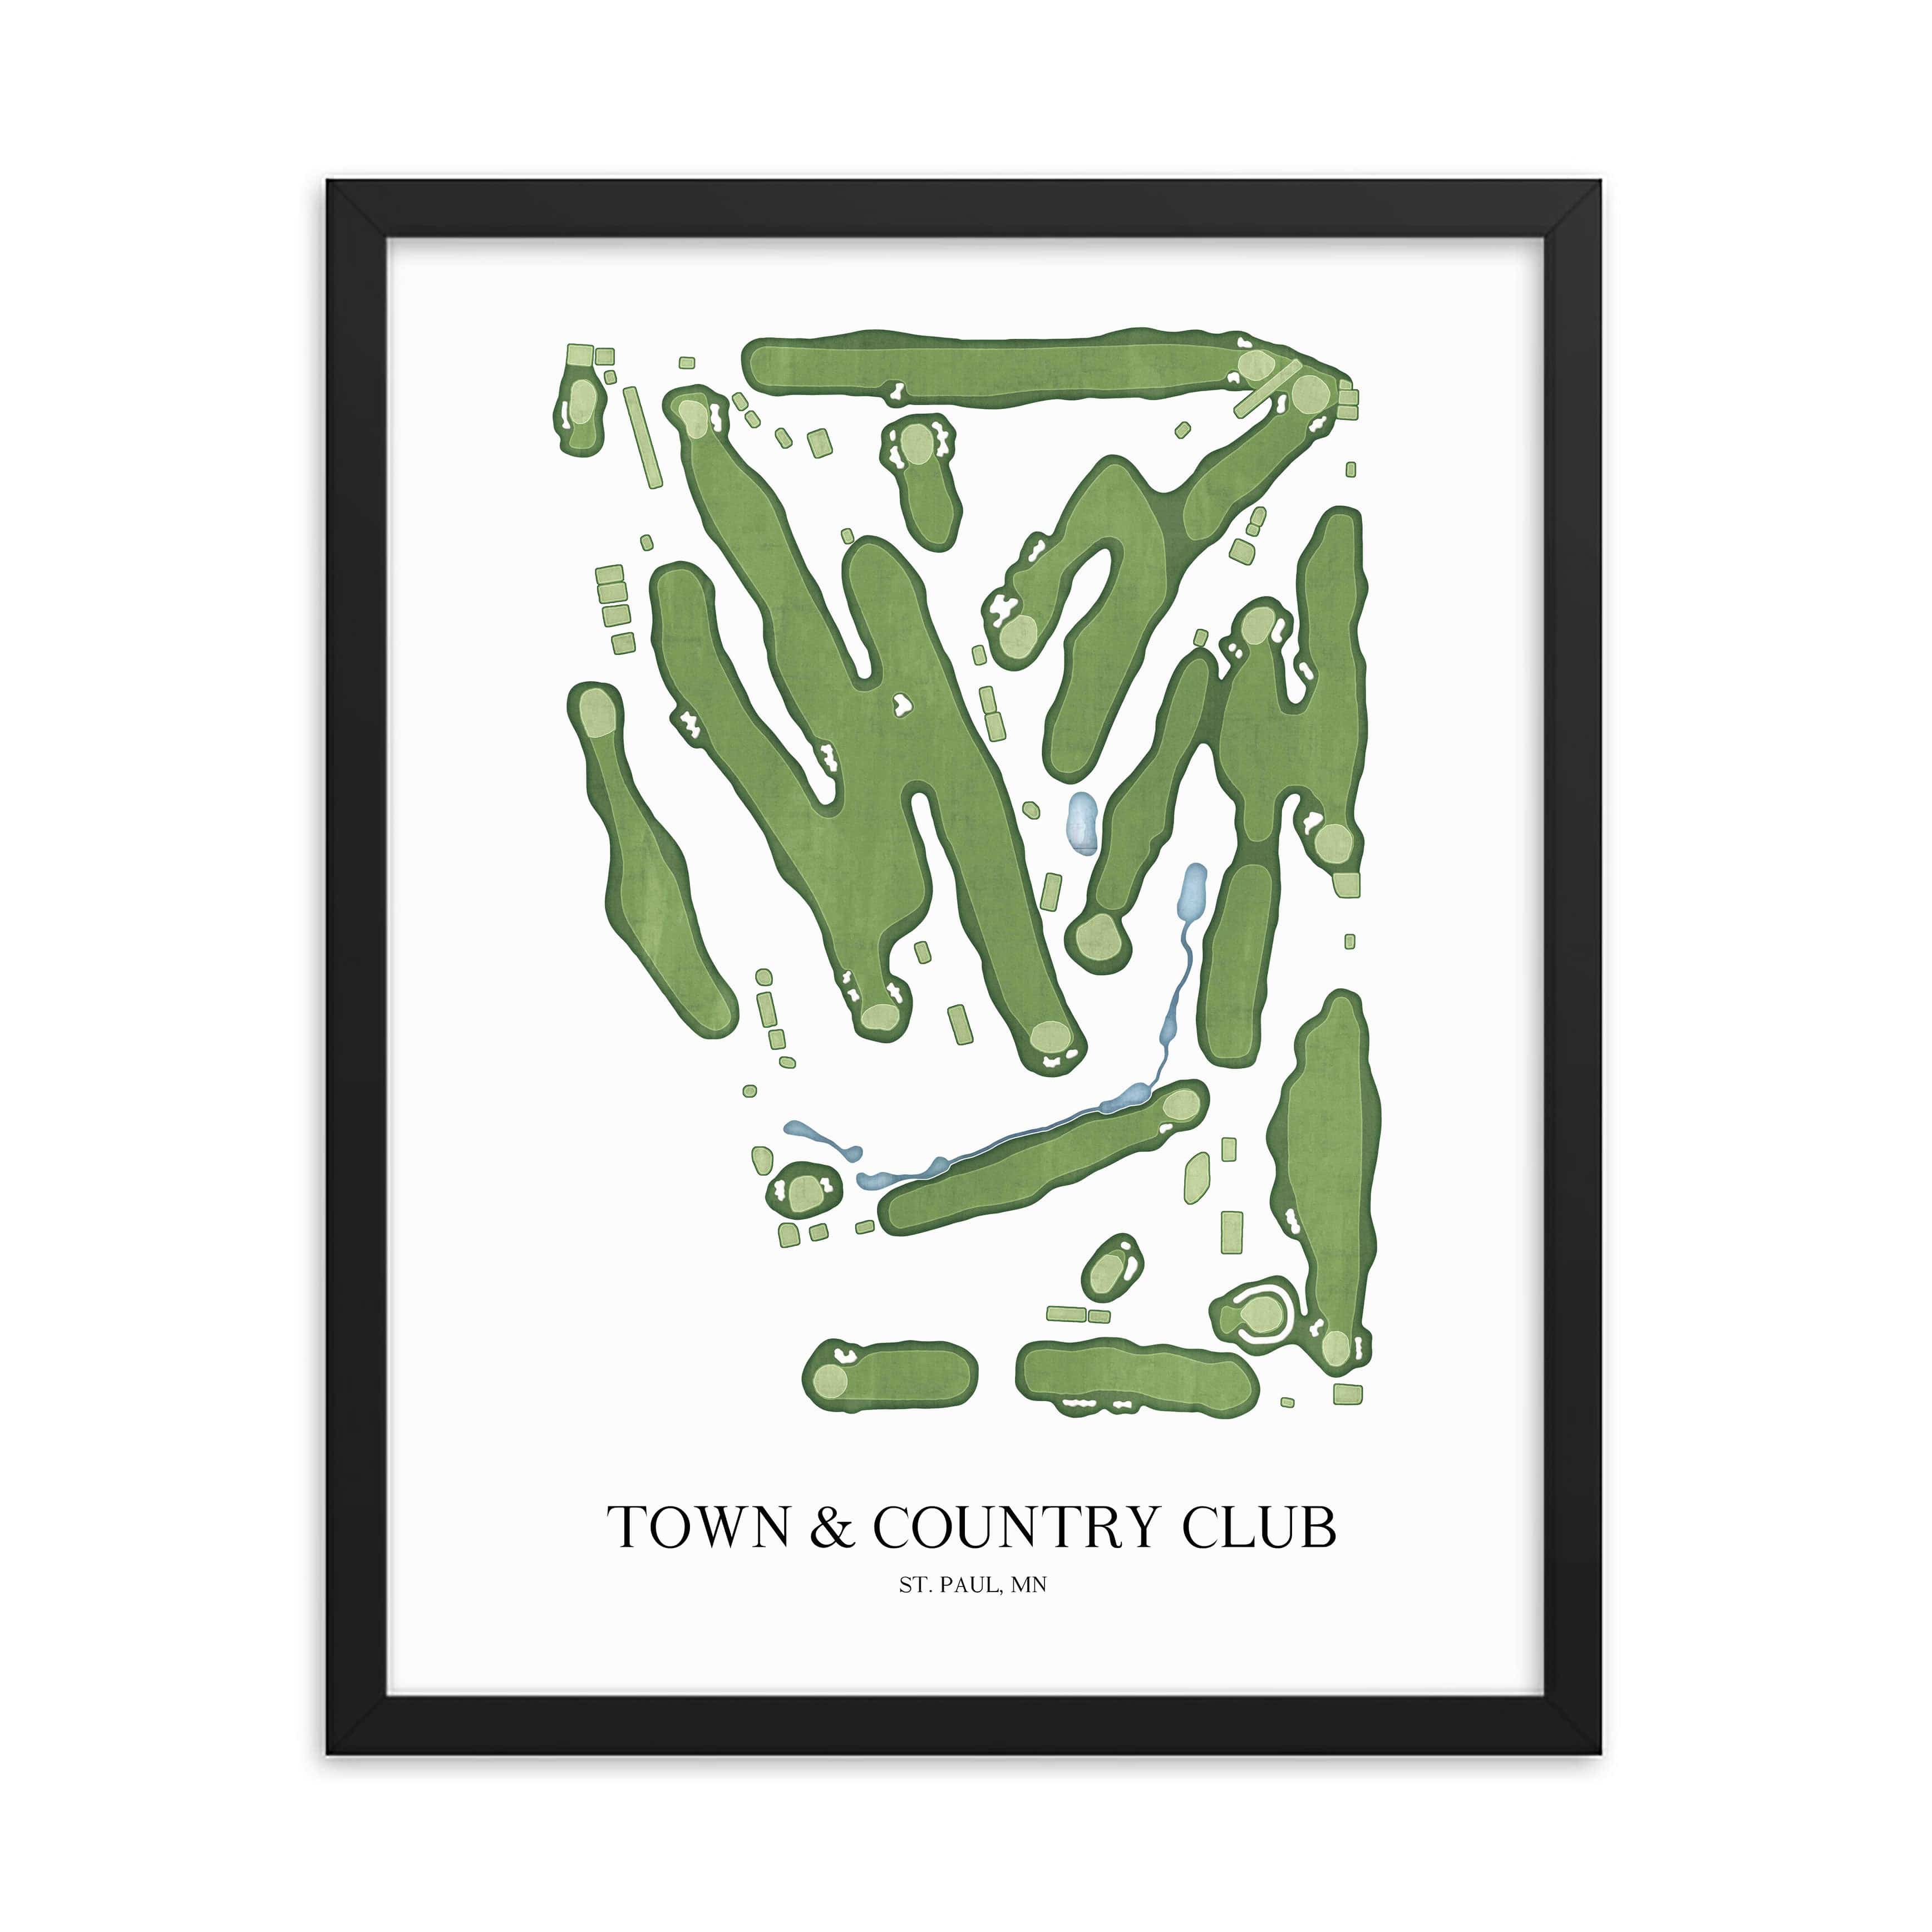 The 19th Hole Golf Shop - Golf Course Prints -  Town & Country Club Golf Course Map